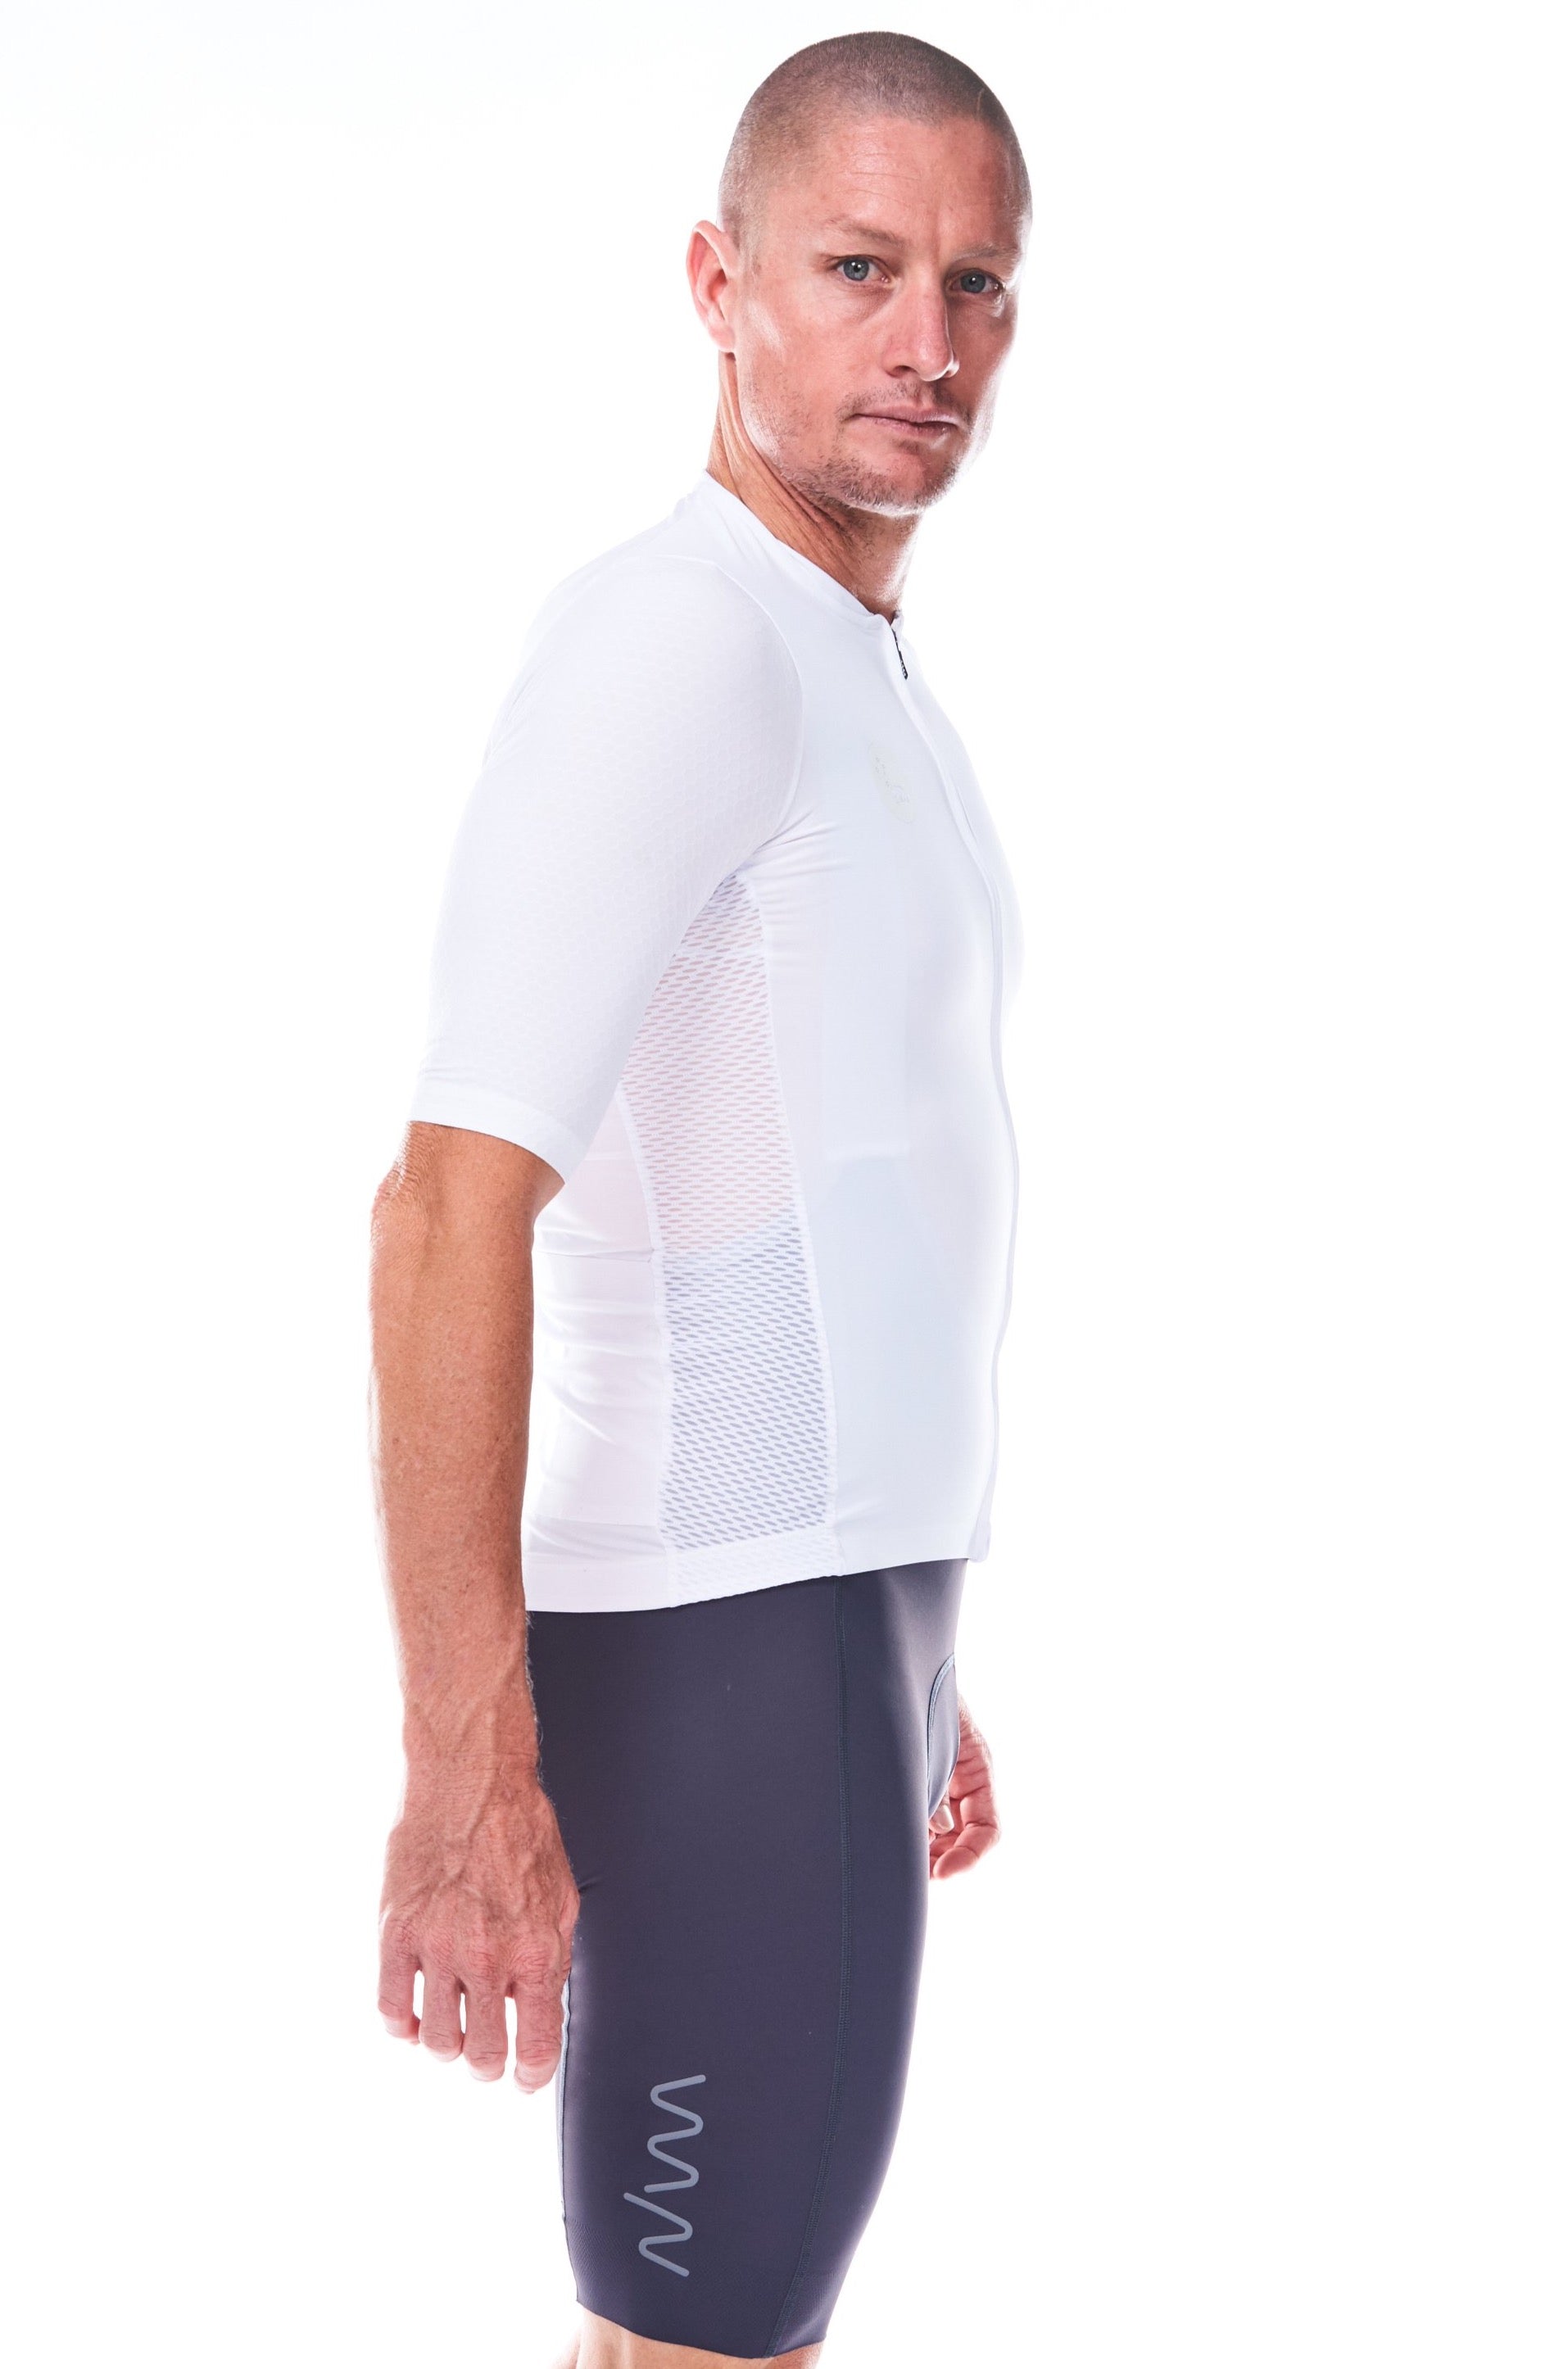 men's LUCEO hex racer cycling jersey - white